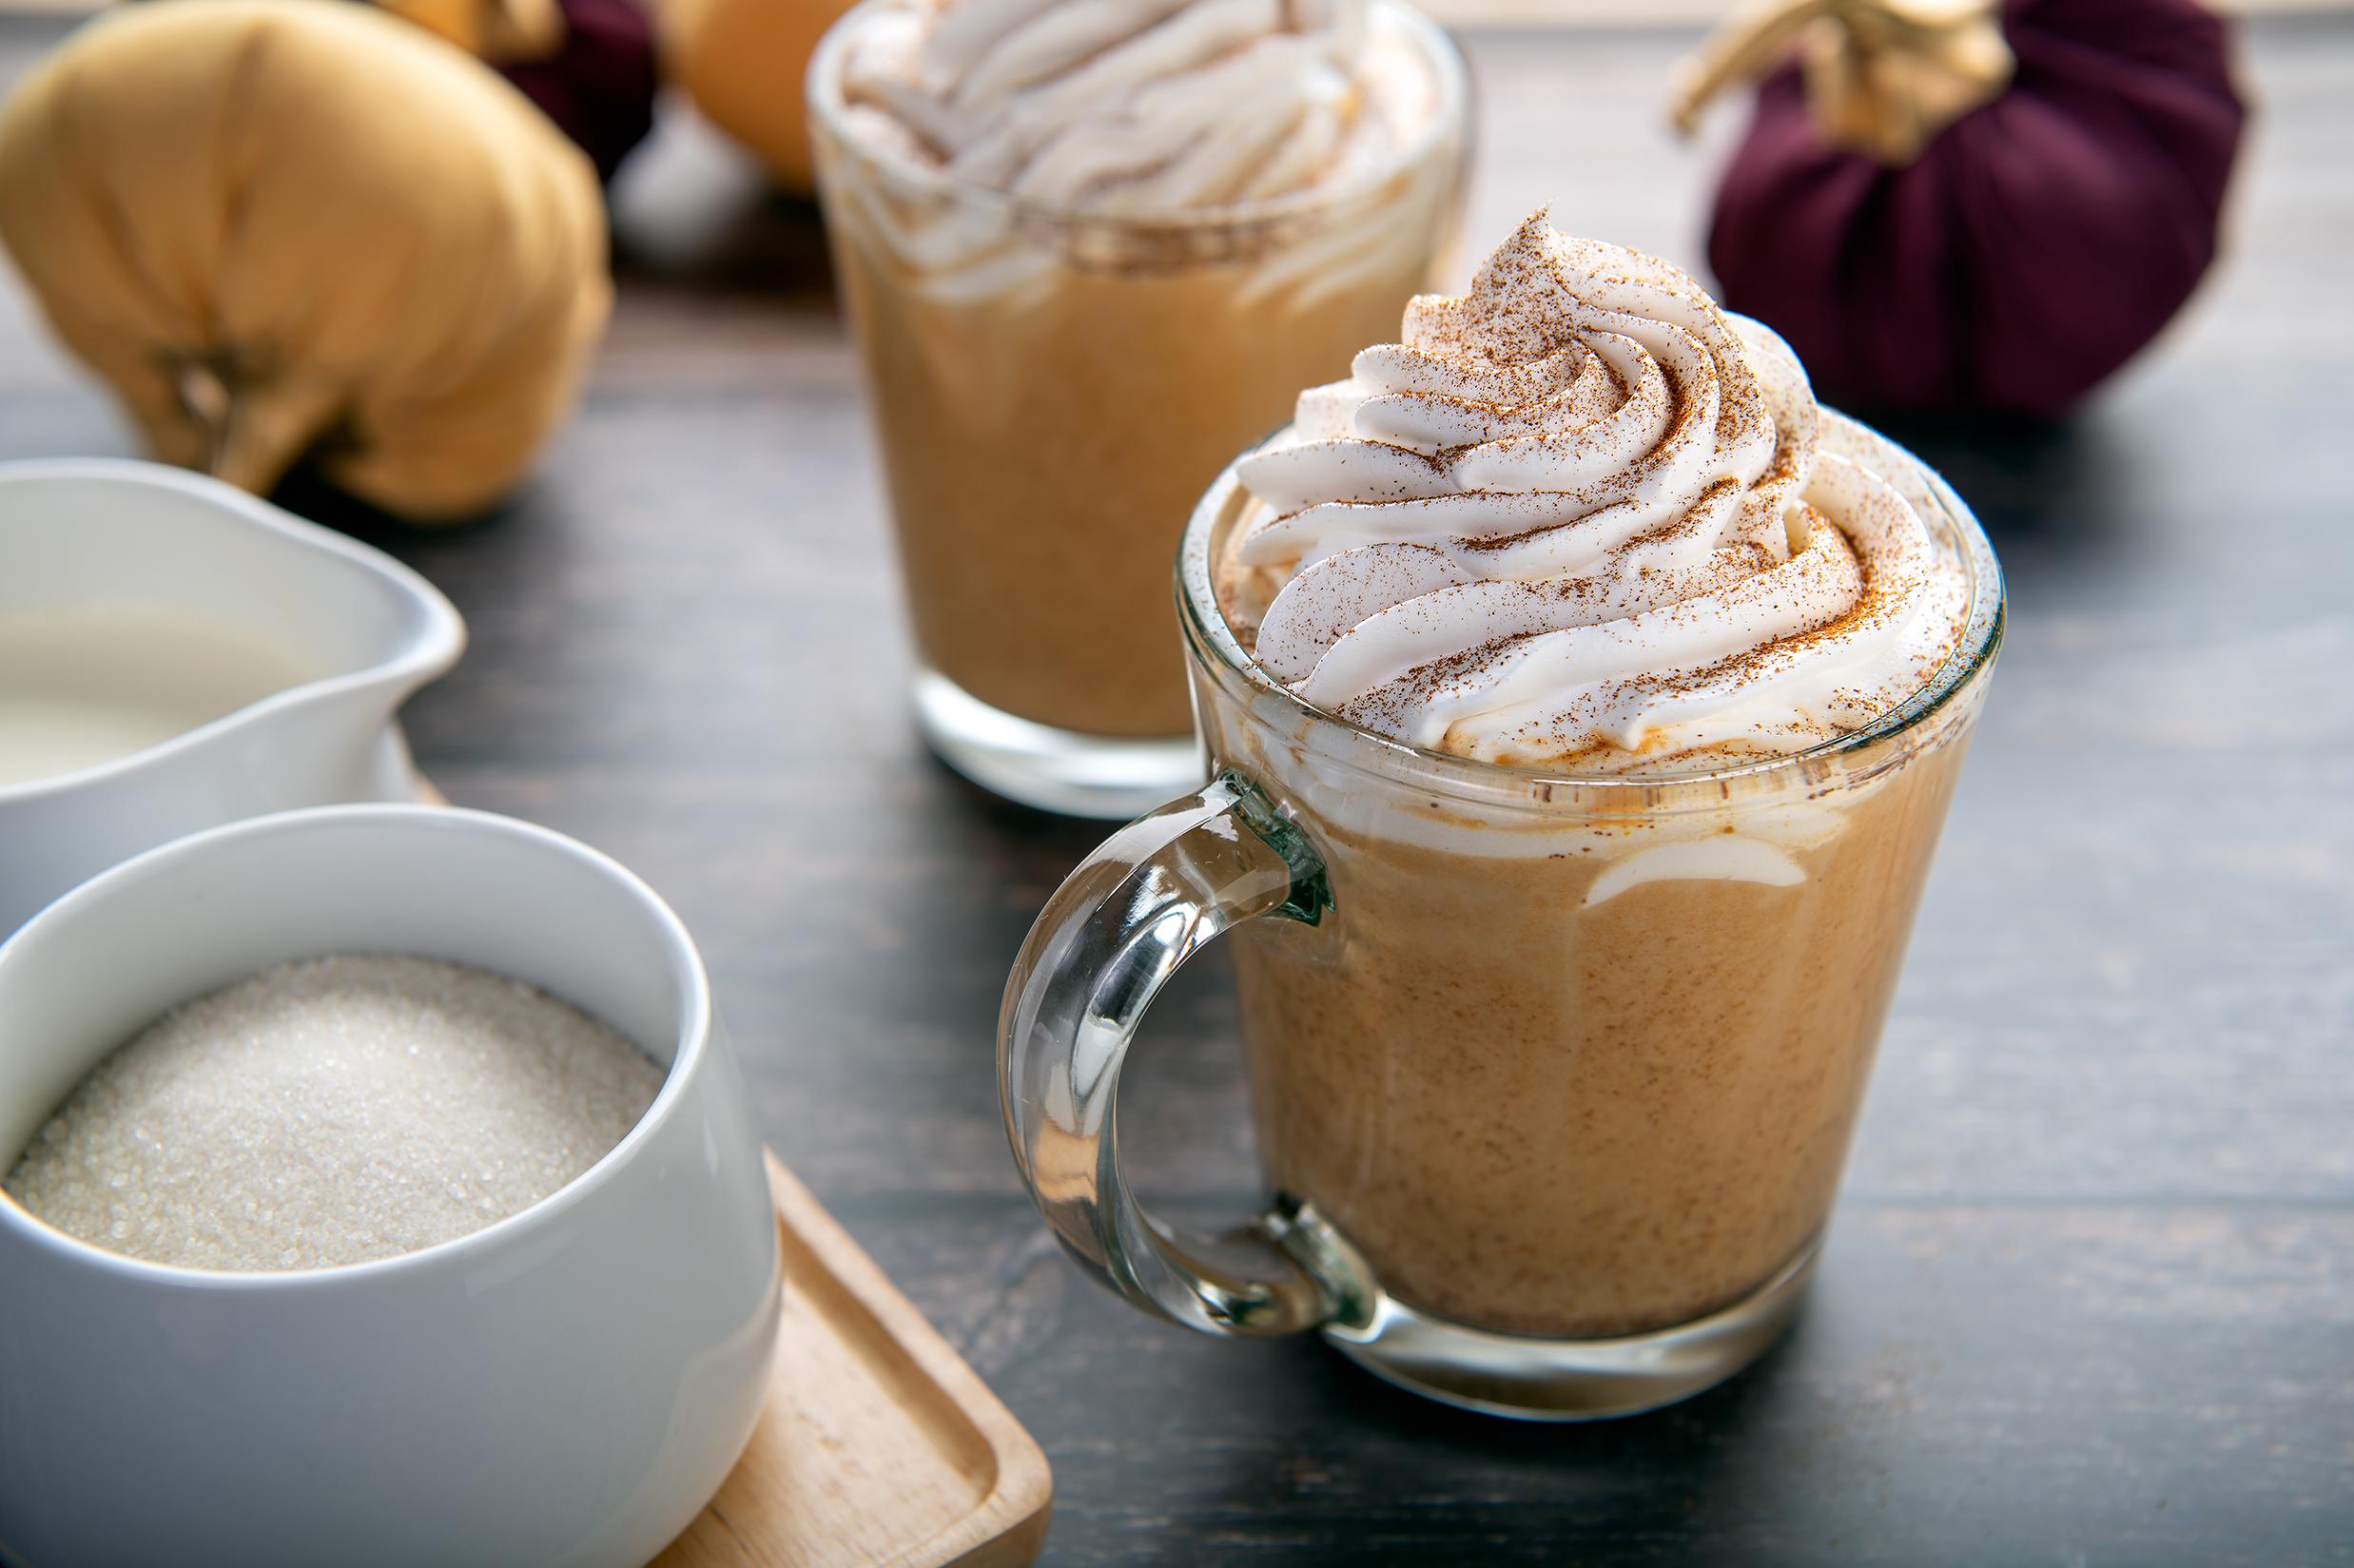  Savor the warmth and coziness of fall with this soothing and flavorful latte.